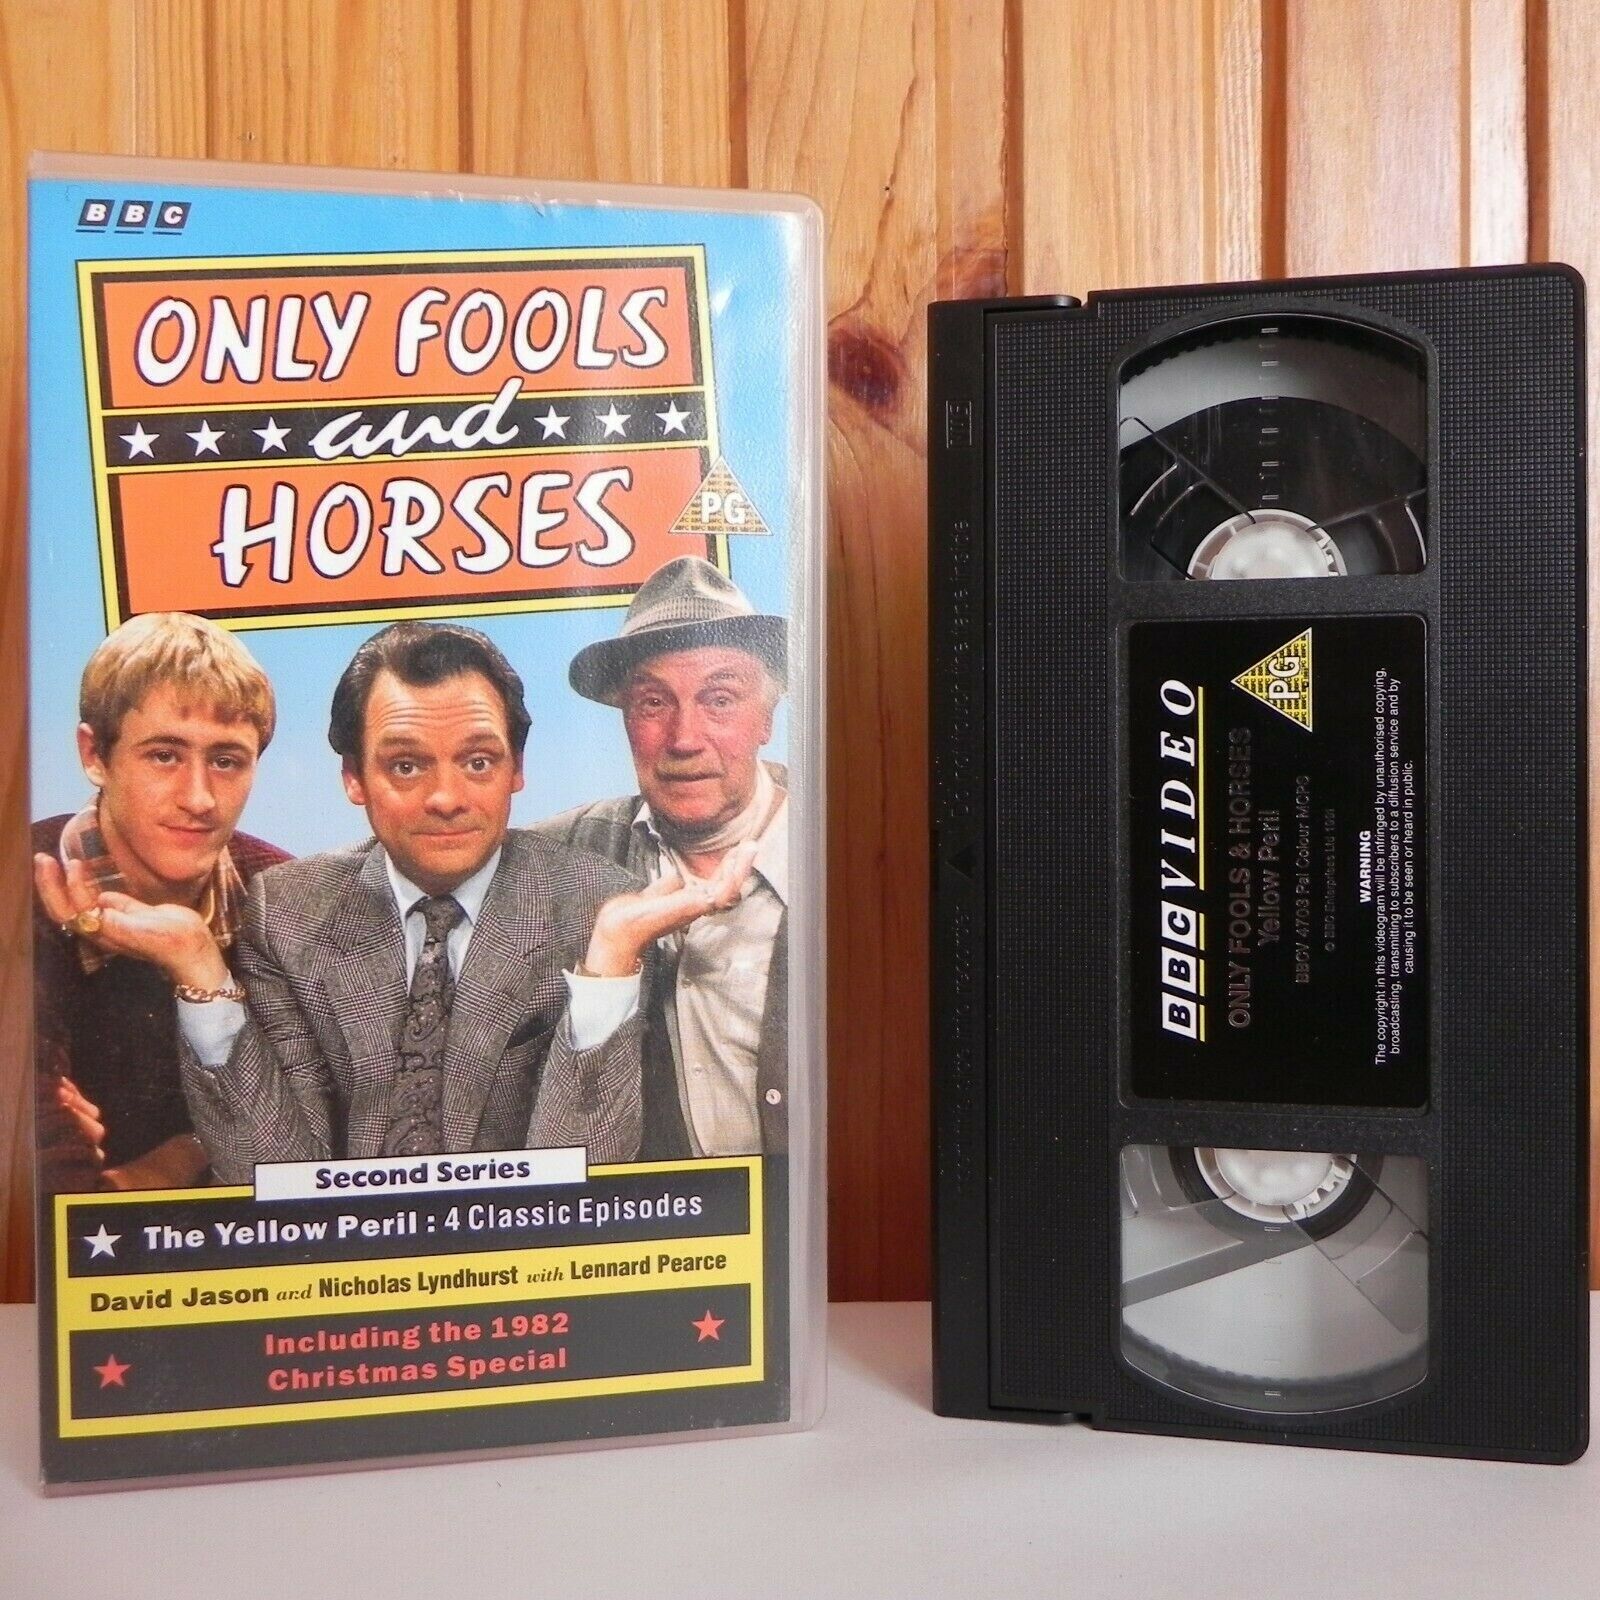 Only Fools And Horses - BBC - Second Series - 4 Classic Episodes - TV Show - VHS-